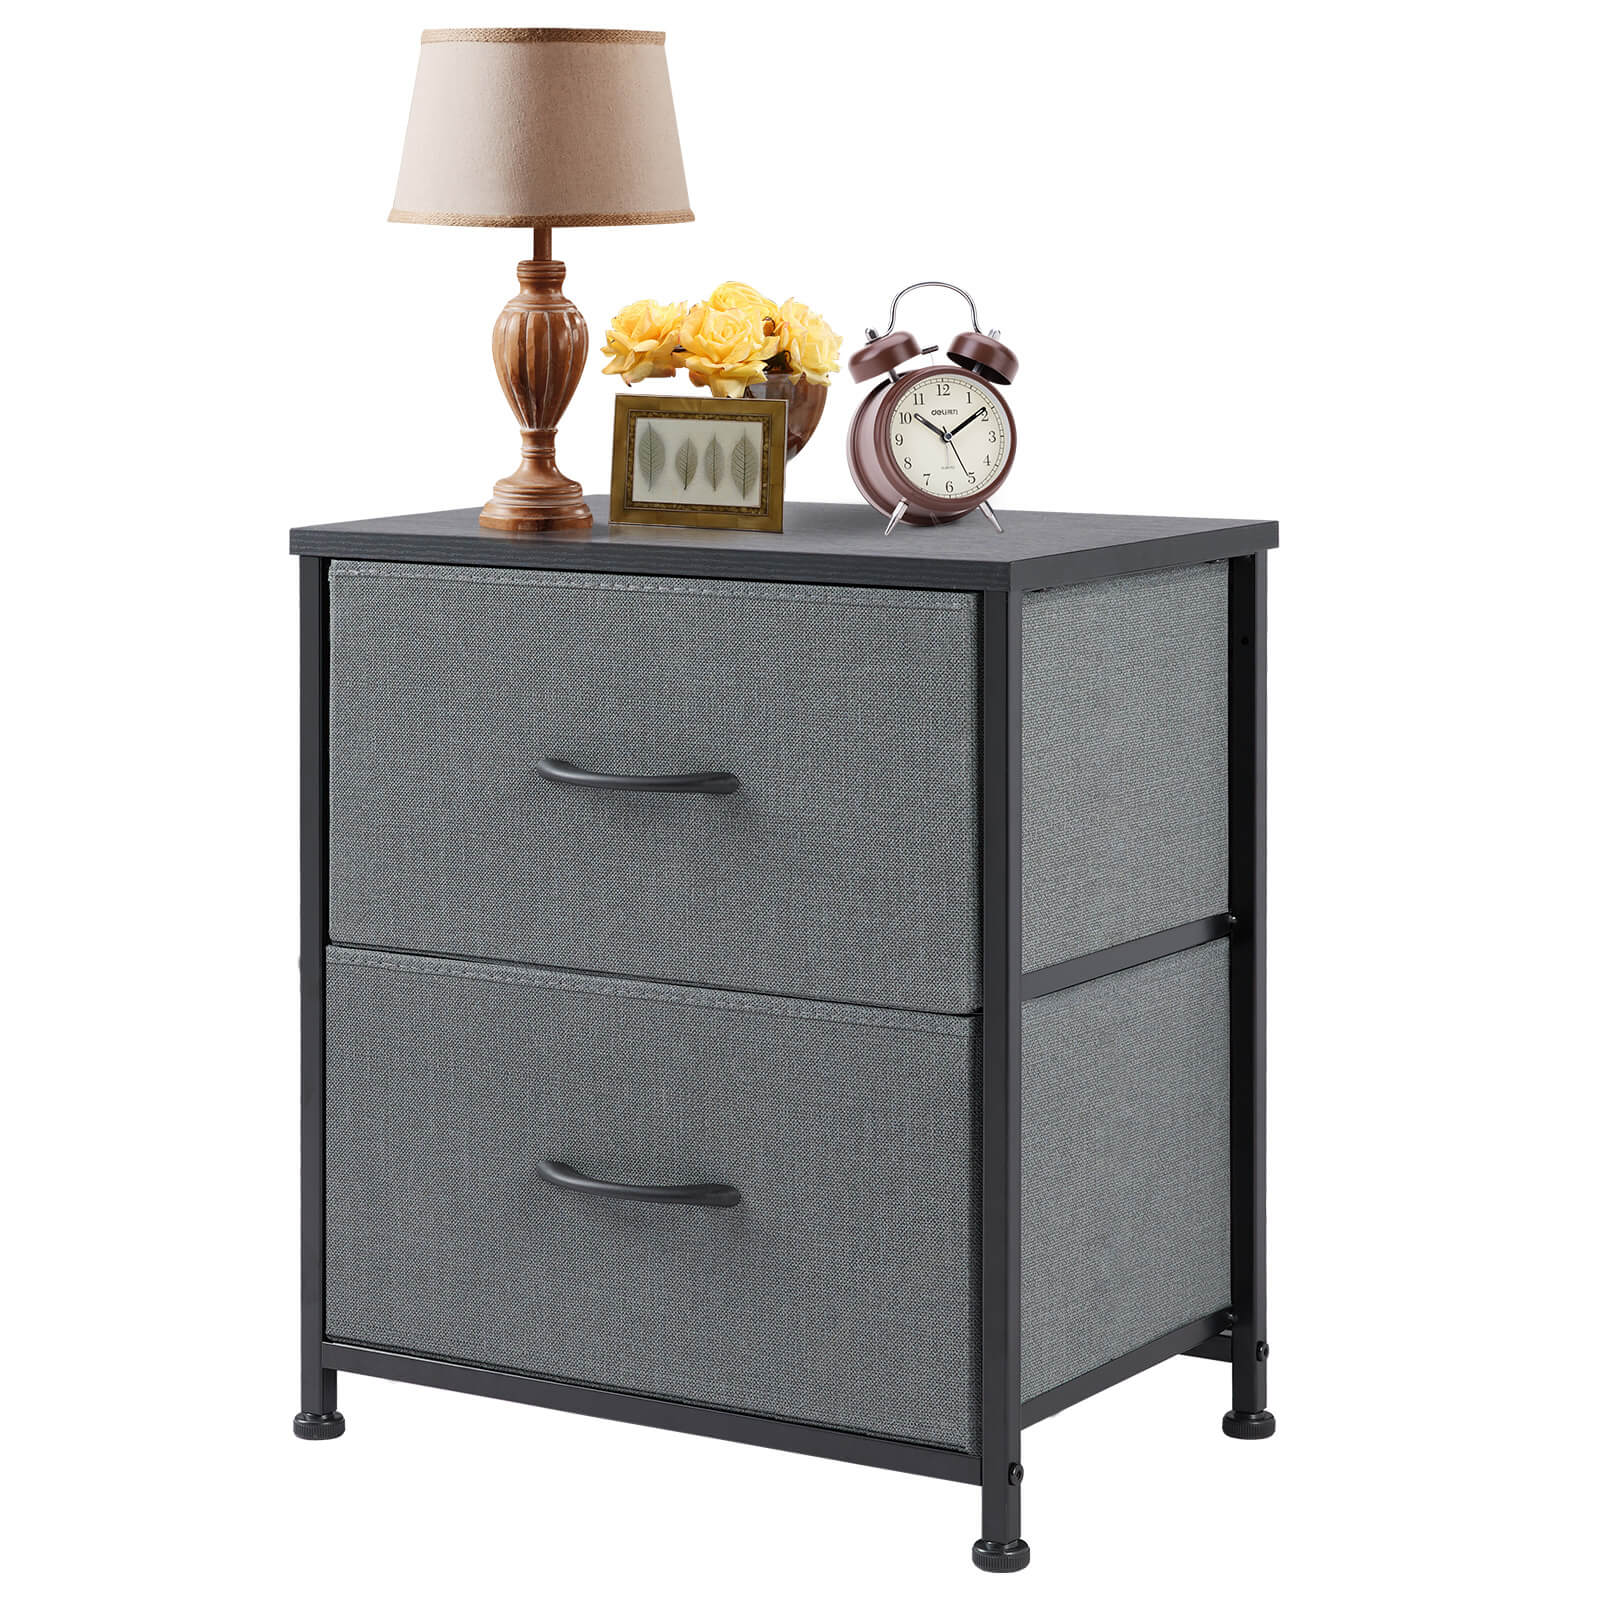 2 Piece Nightstand Set - 2 Storage Drawers, Bedside Furniture End Table, Suitable for Living Room, Bedroom, Closet